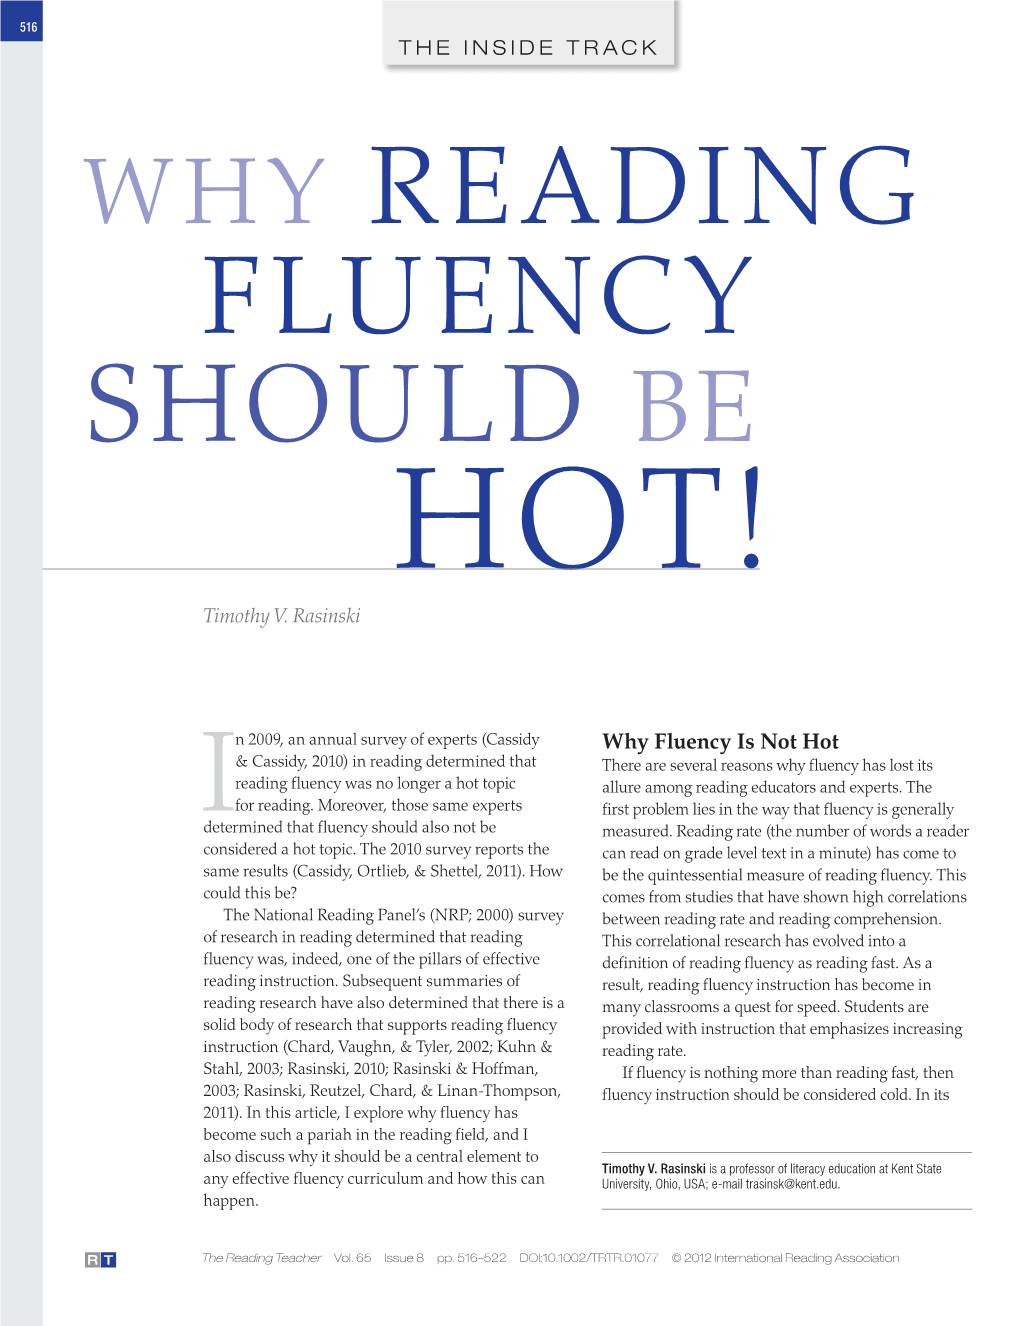 WHY READING FLUENCY SHOULD BE HOT! Timothy V